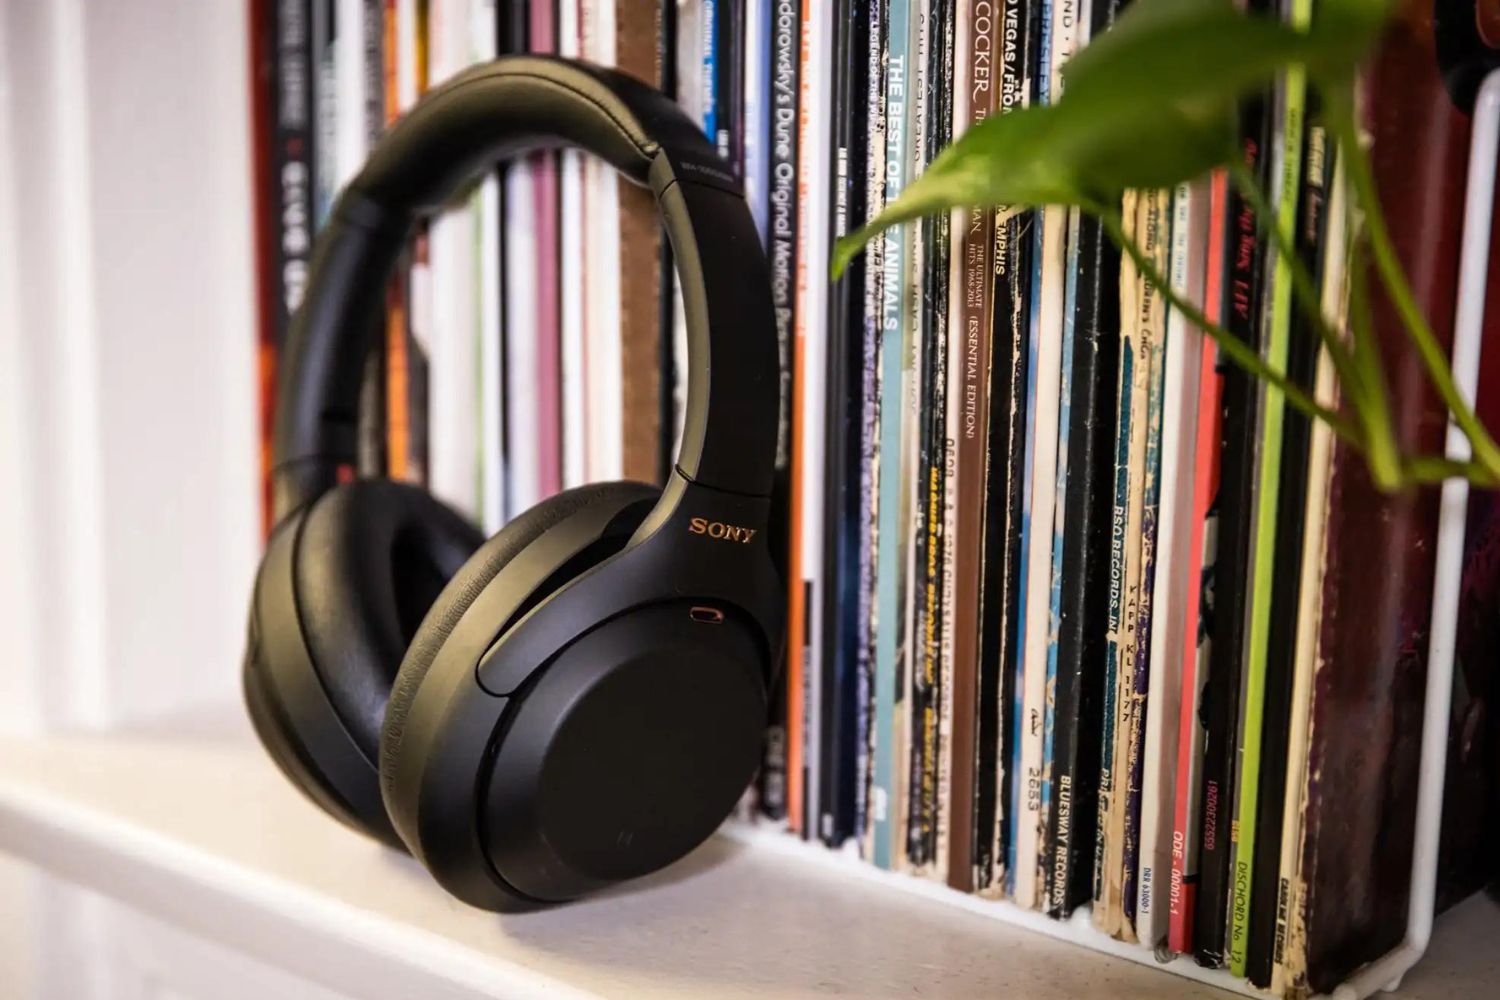 How To Use Sony Noise Cancelling Headphones